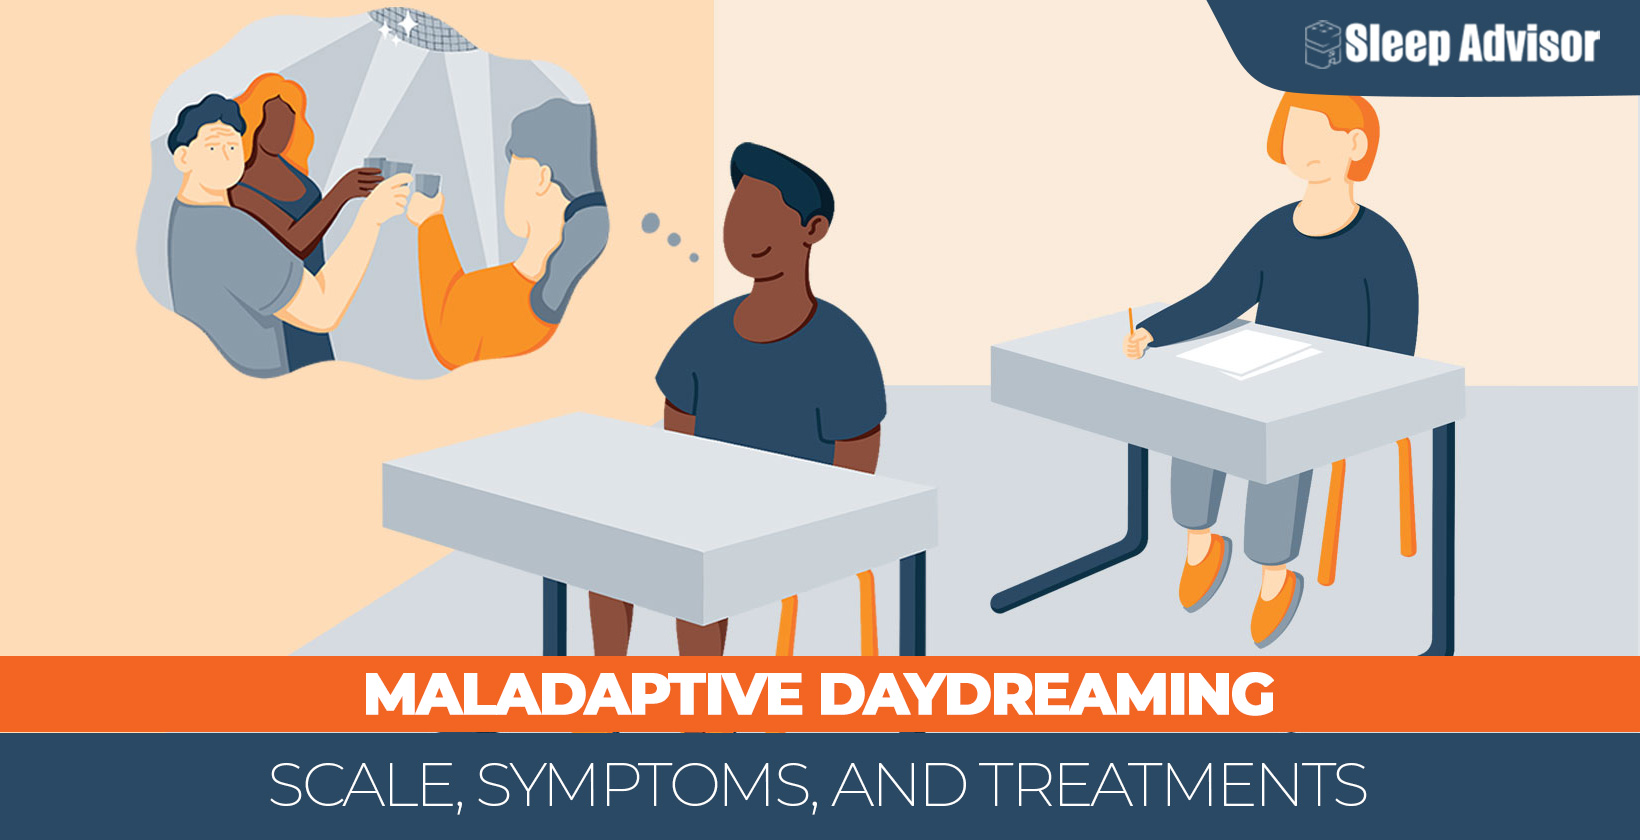 Maladaptive Daydreaming: Scale, Symptoms, and Treatments